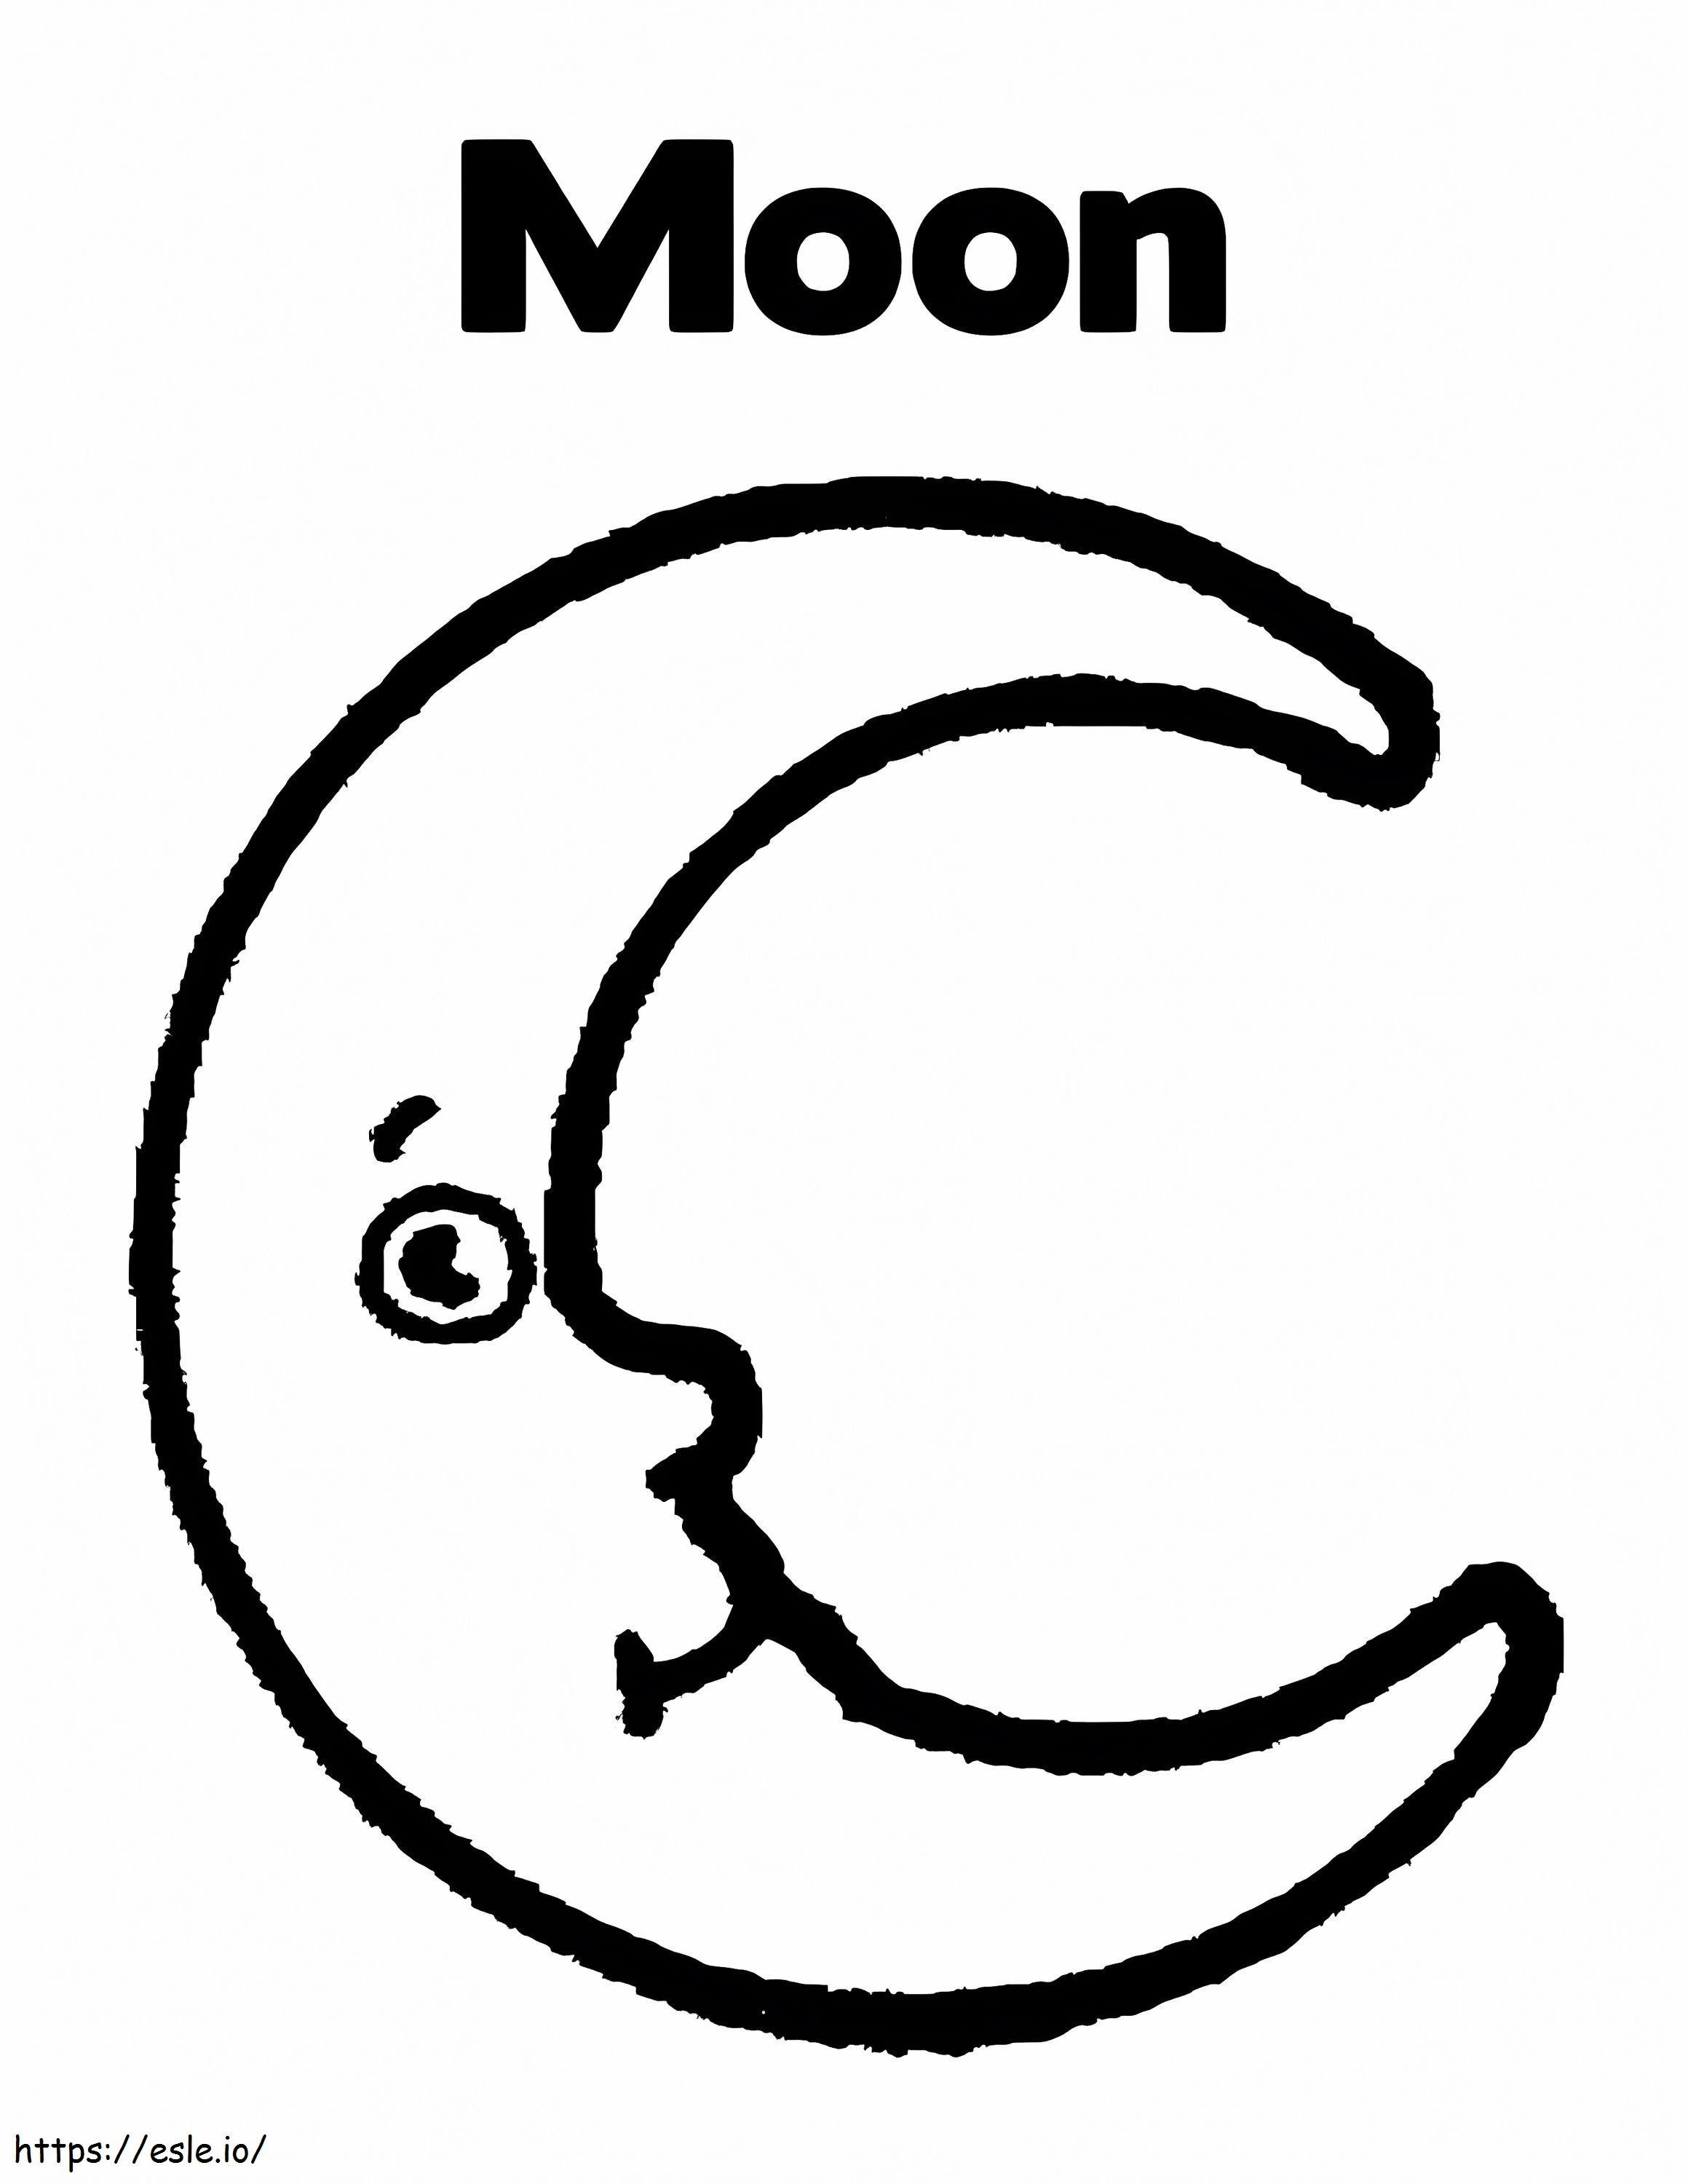 Funny Moon coloring page